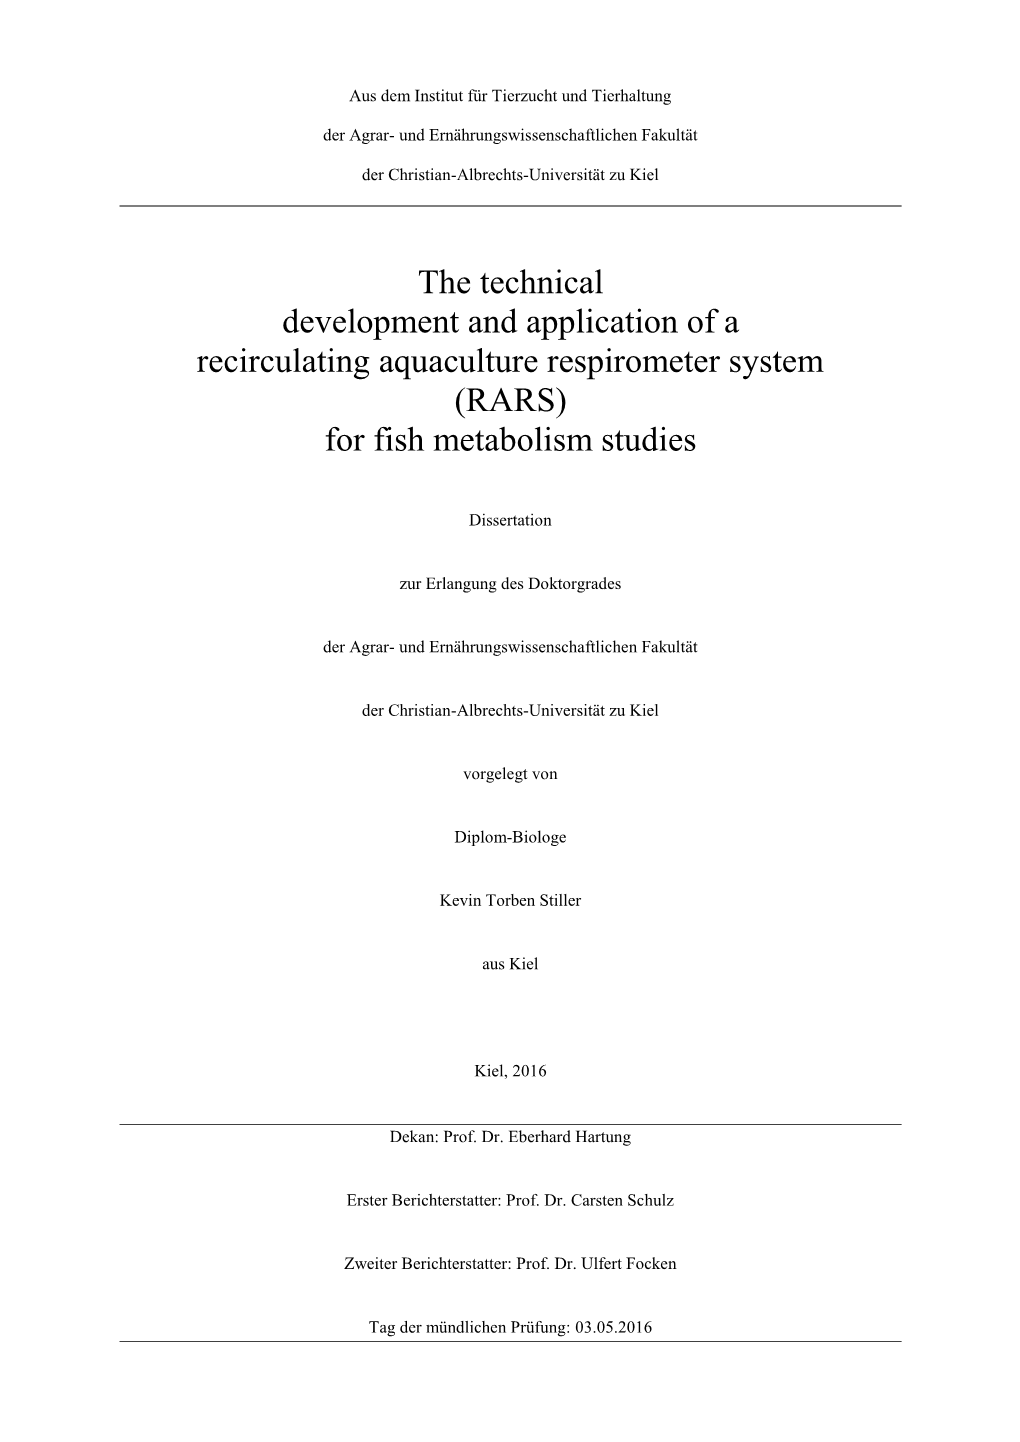 The Technical Development and Application of a Recirculating Aquaculture Respirometer System (RARS) for Fish Metabolism Studies